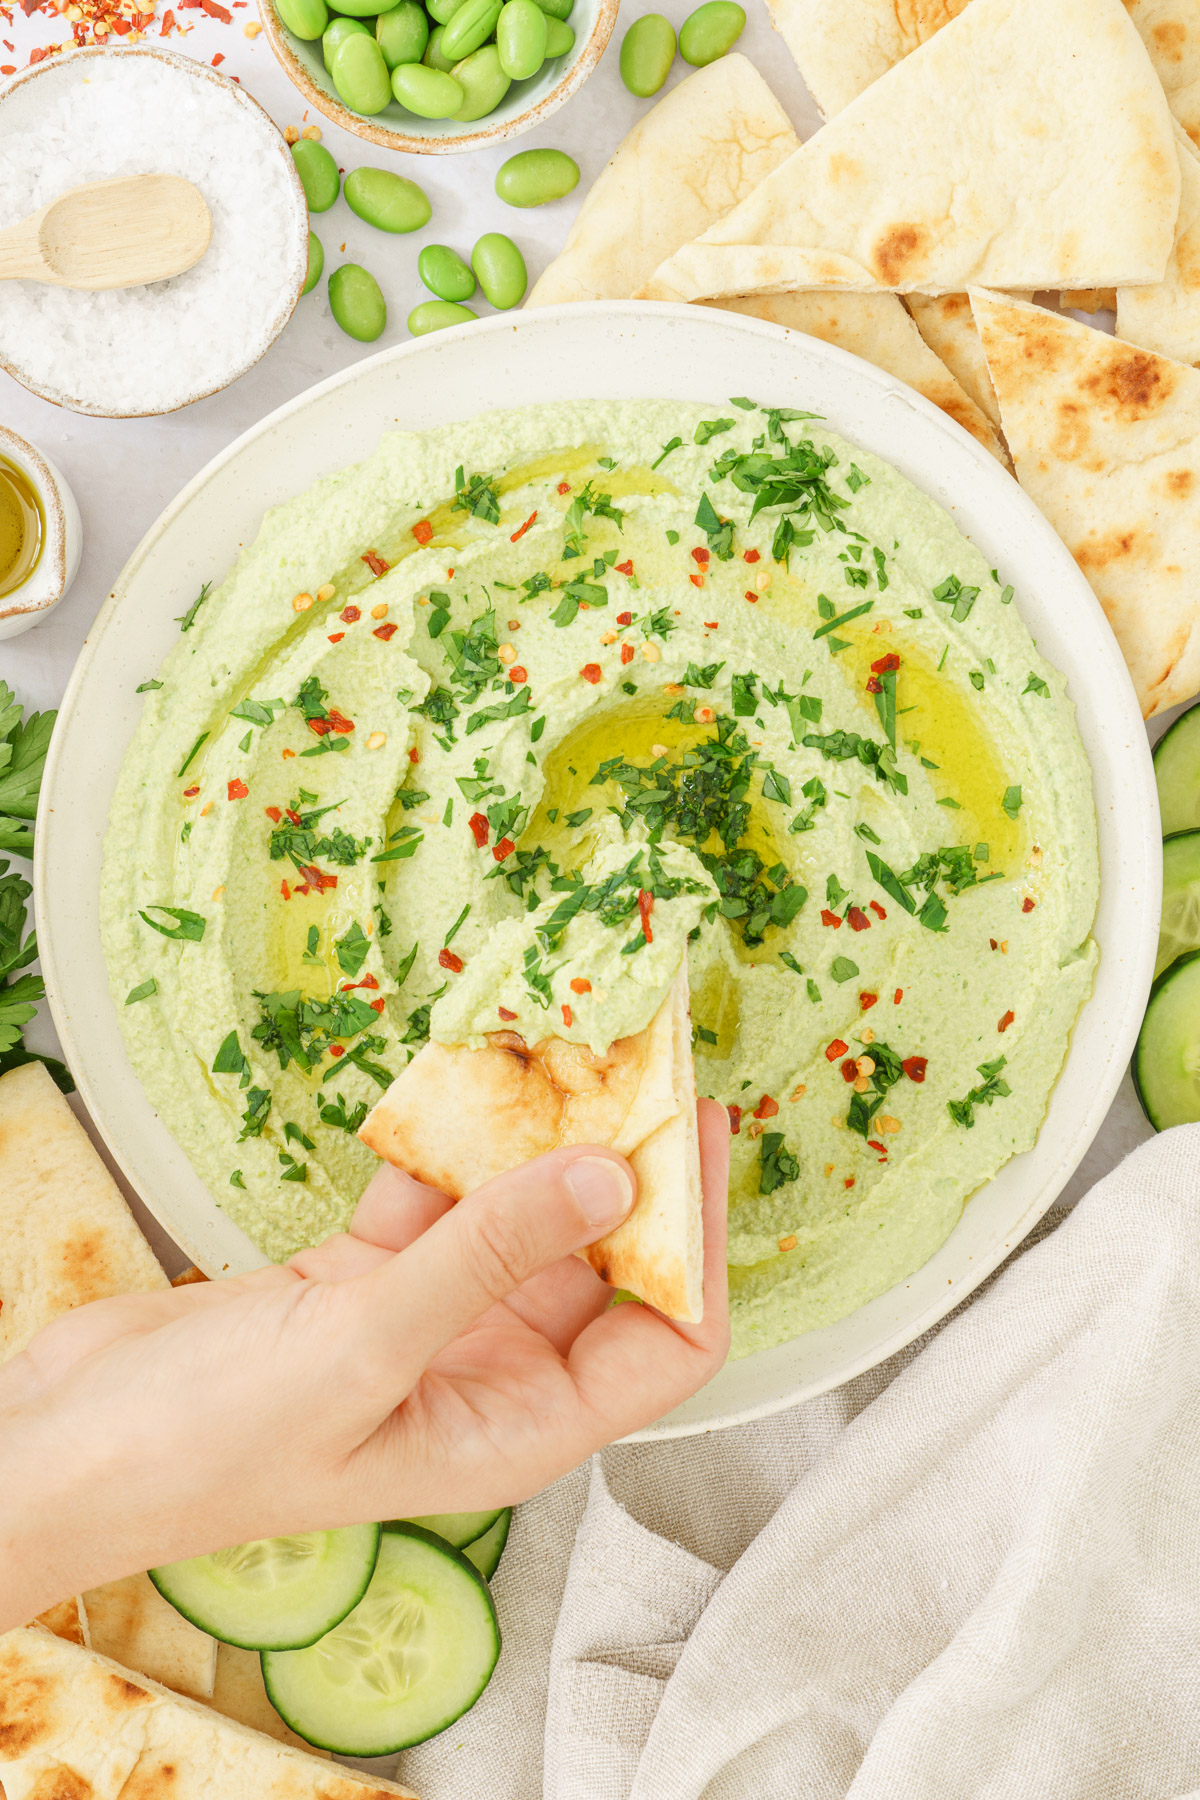 top view image of a hand tossing pita bread in to an edamame hummus